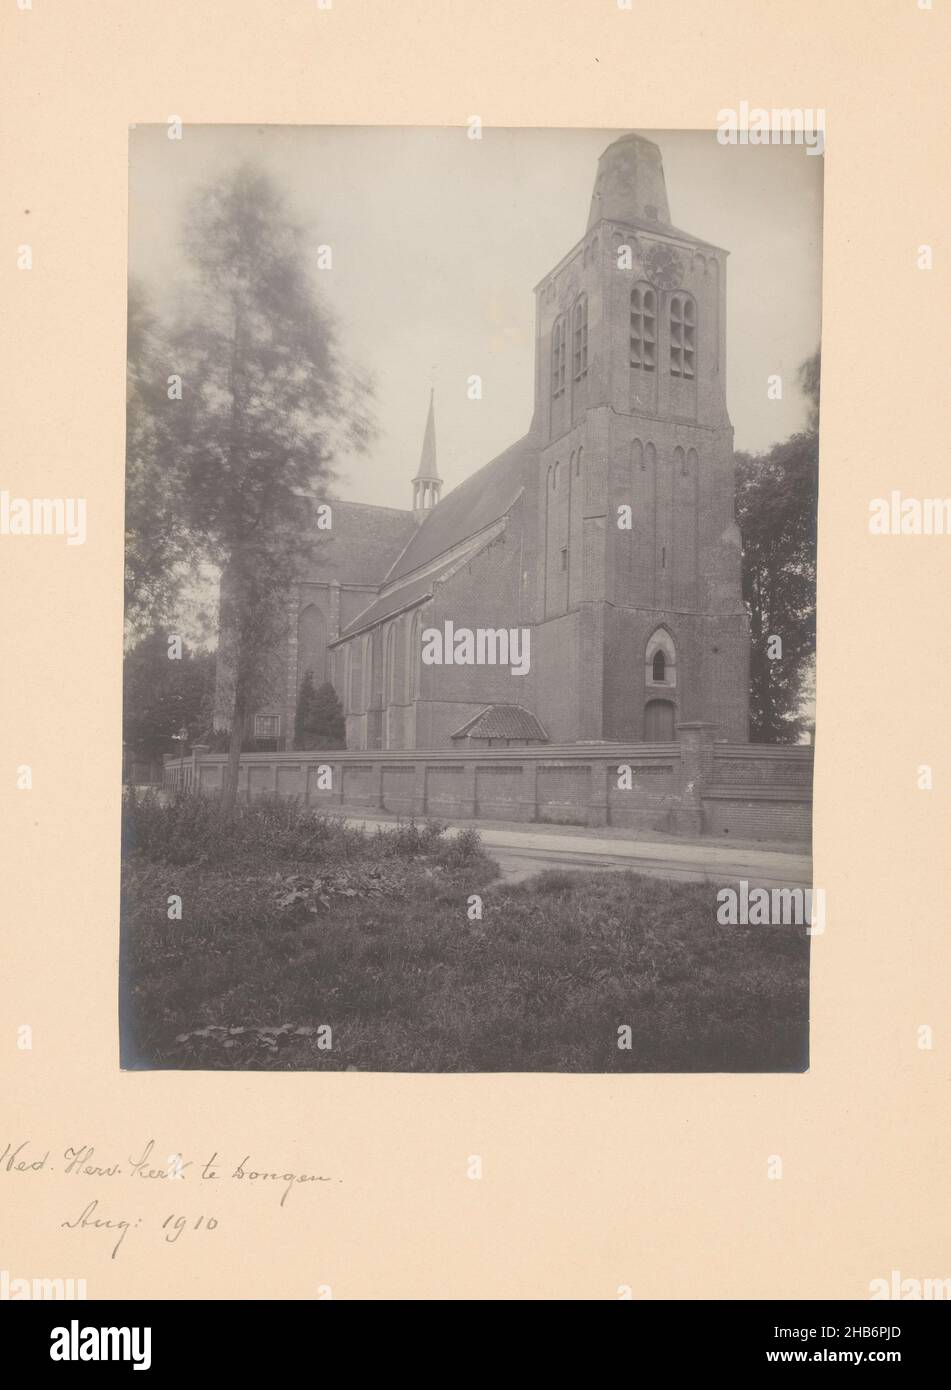 View of the Reformed Church at Dongen, anoniem (Monumentenzorg) (attributed to), Dongen, 1910, photographic support, cardboard, gelatin silver print, height 218 mm × width 159 mm Stock Photo